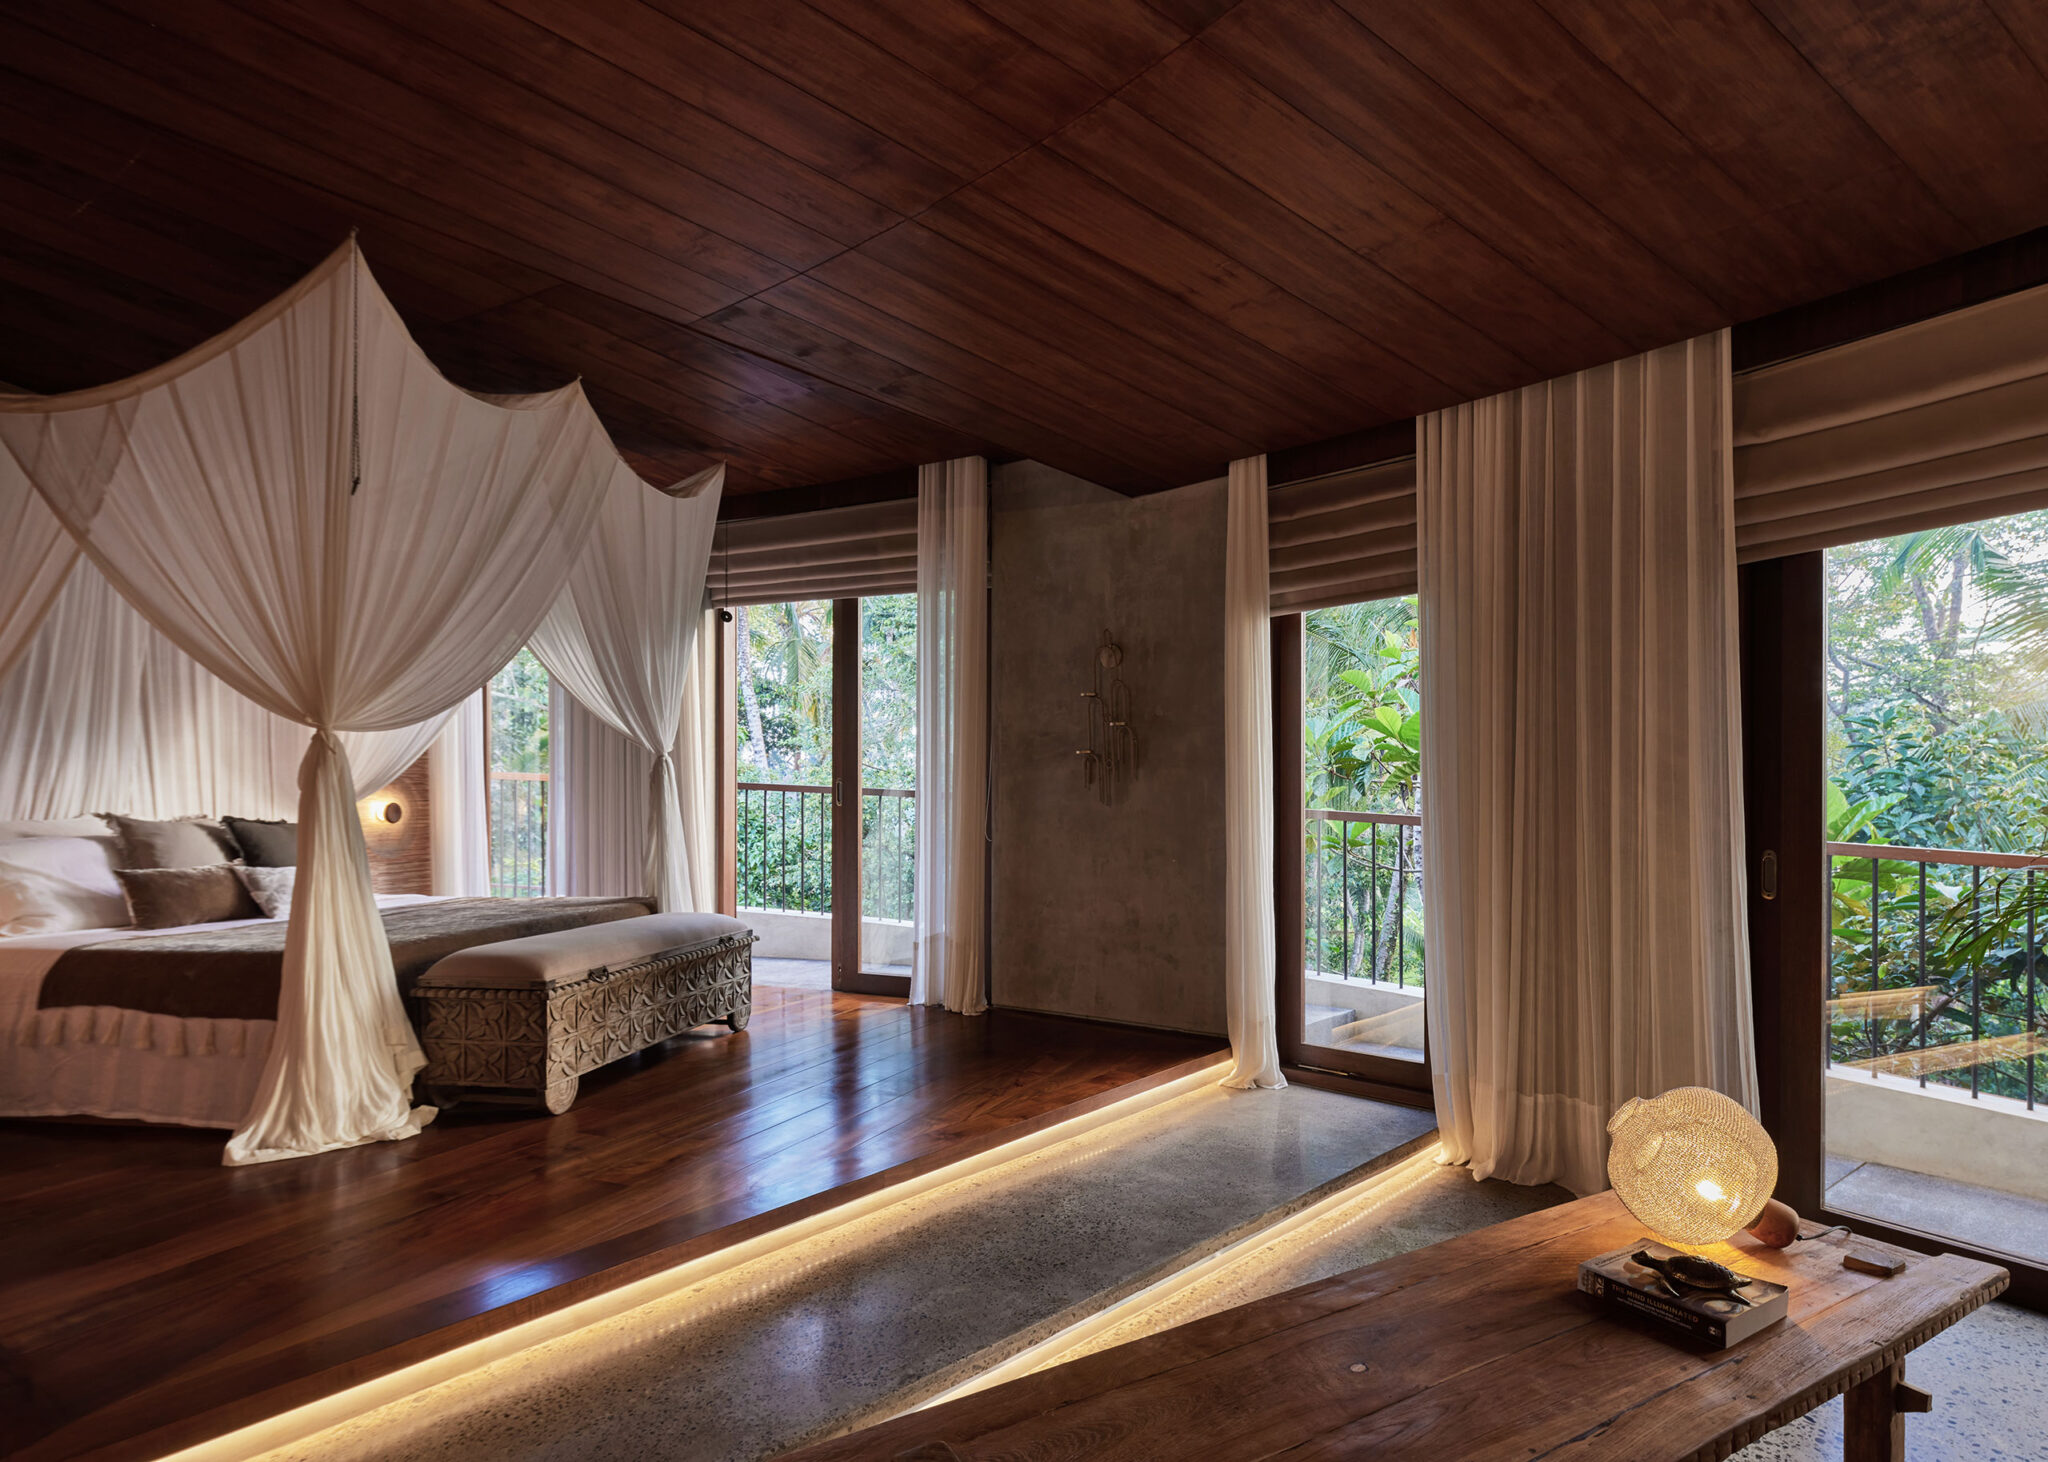 Bali's house mater suite